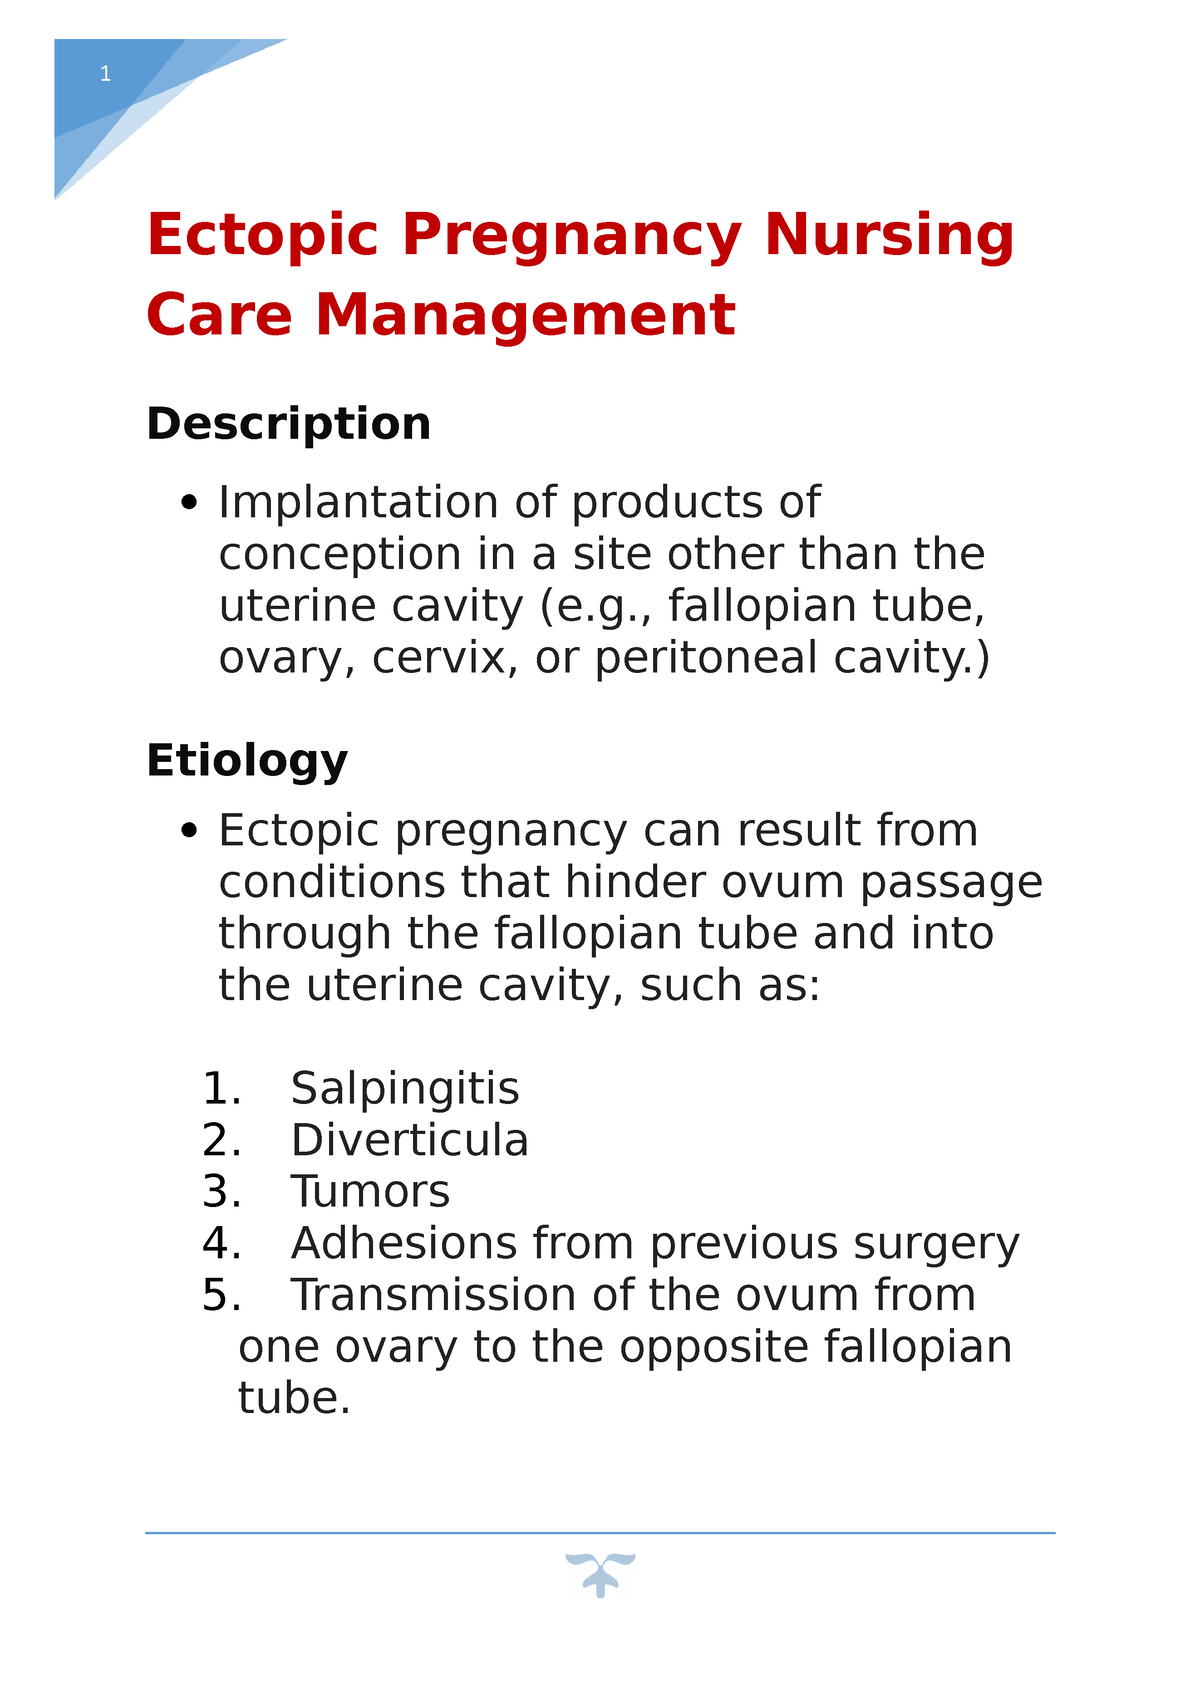 essay about ectopic pregnancy